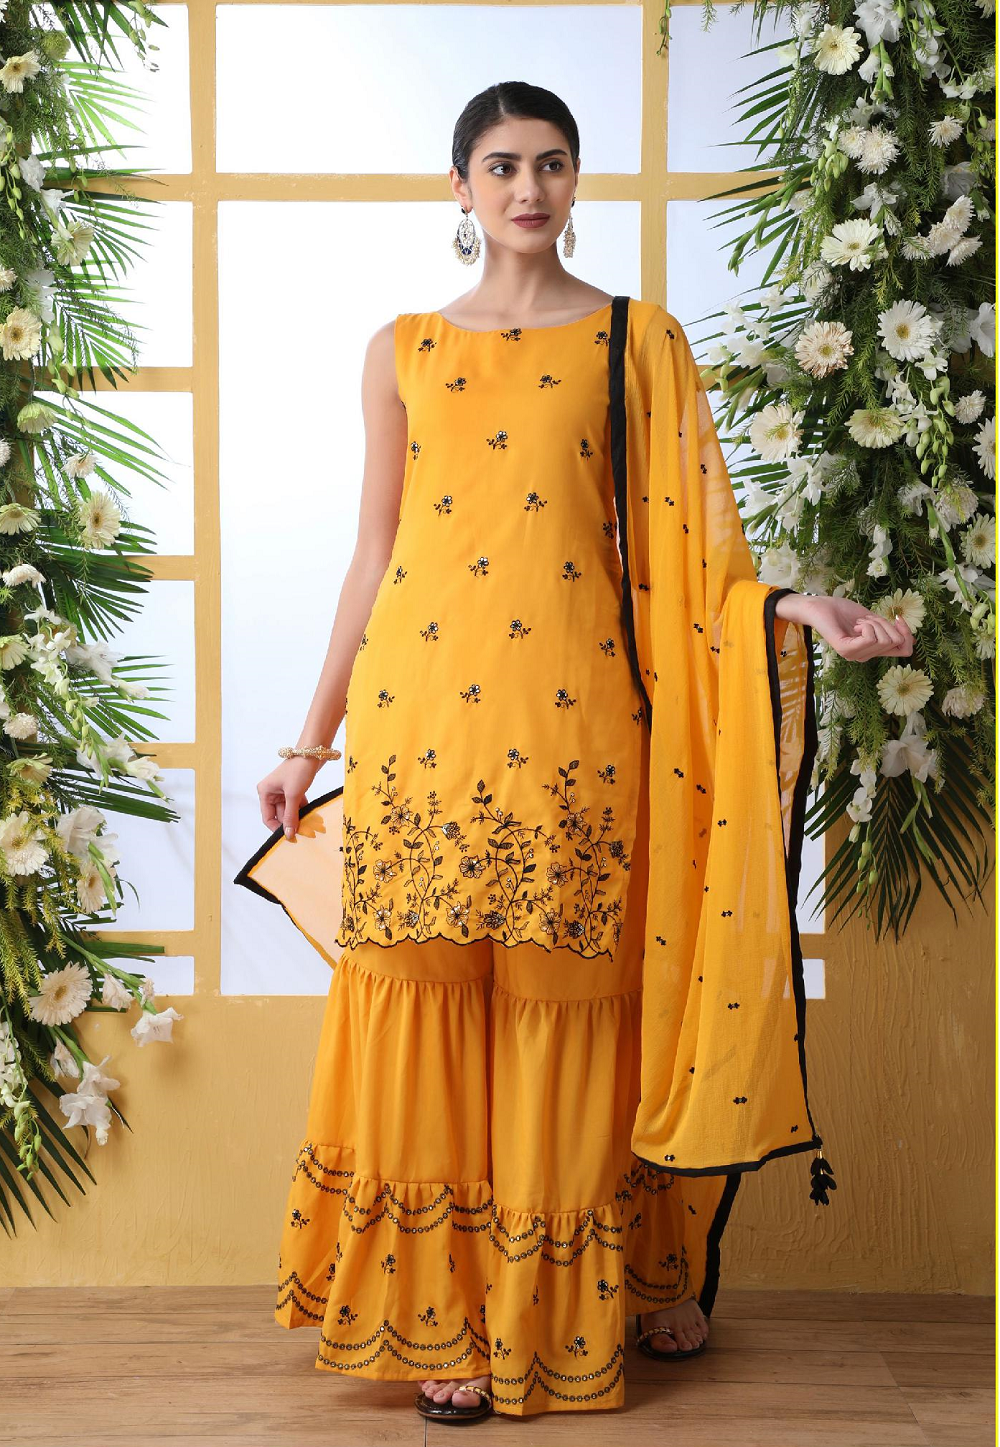 Embroidered Cotton Pakistani Suit in Mustard